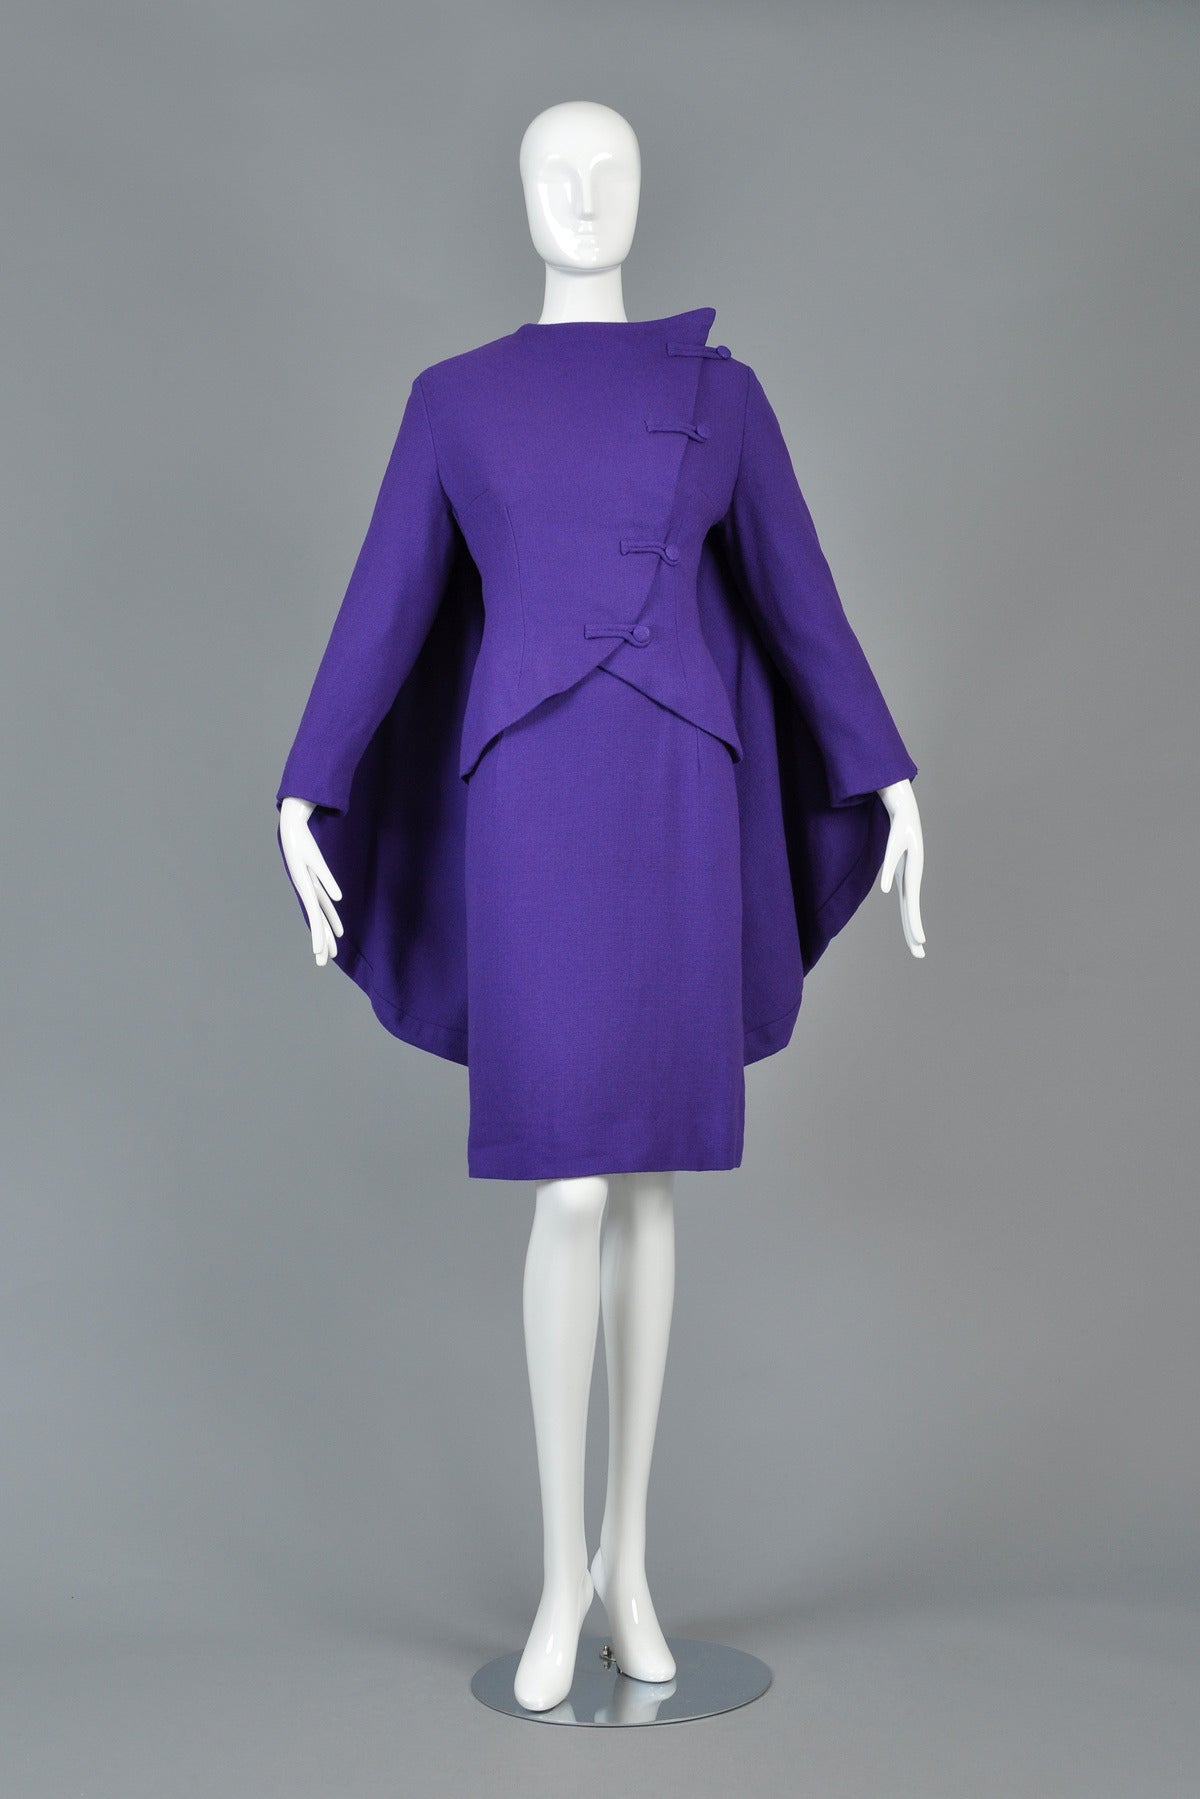 Seriously amazing 1950s eggplant colored wool jacket + dress ensemble. Killer, one-of-a-kind, hand-tailored piece.  Made from mid-weight backed wool, or possibly wool-blend. Simple high-necked dress with 3/4 length sleeves and metal zipper in back.